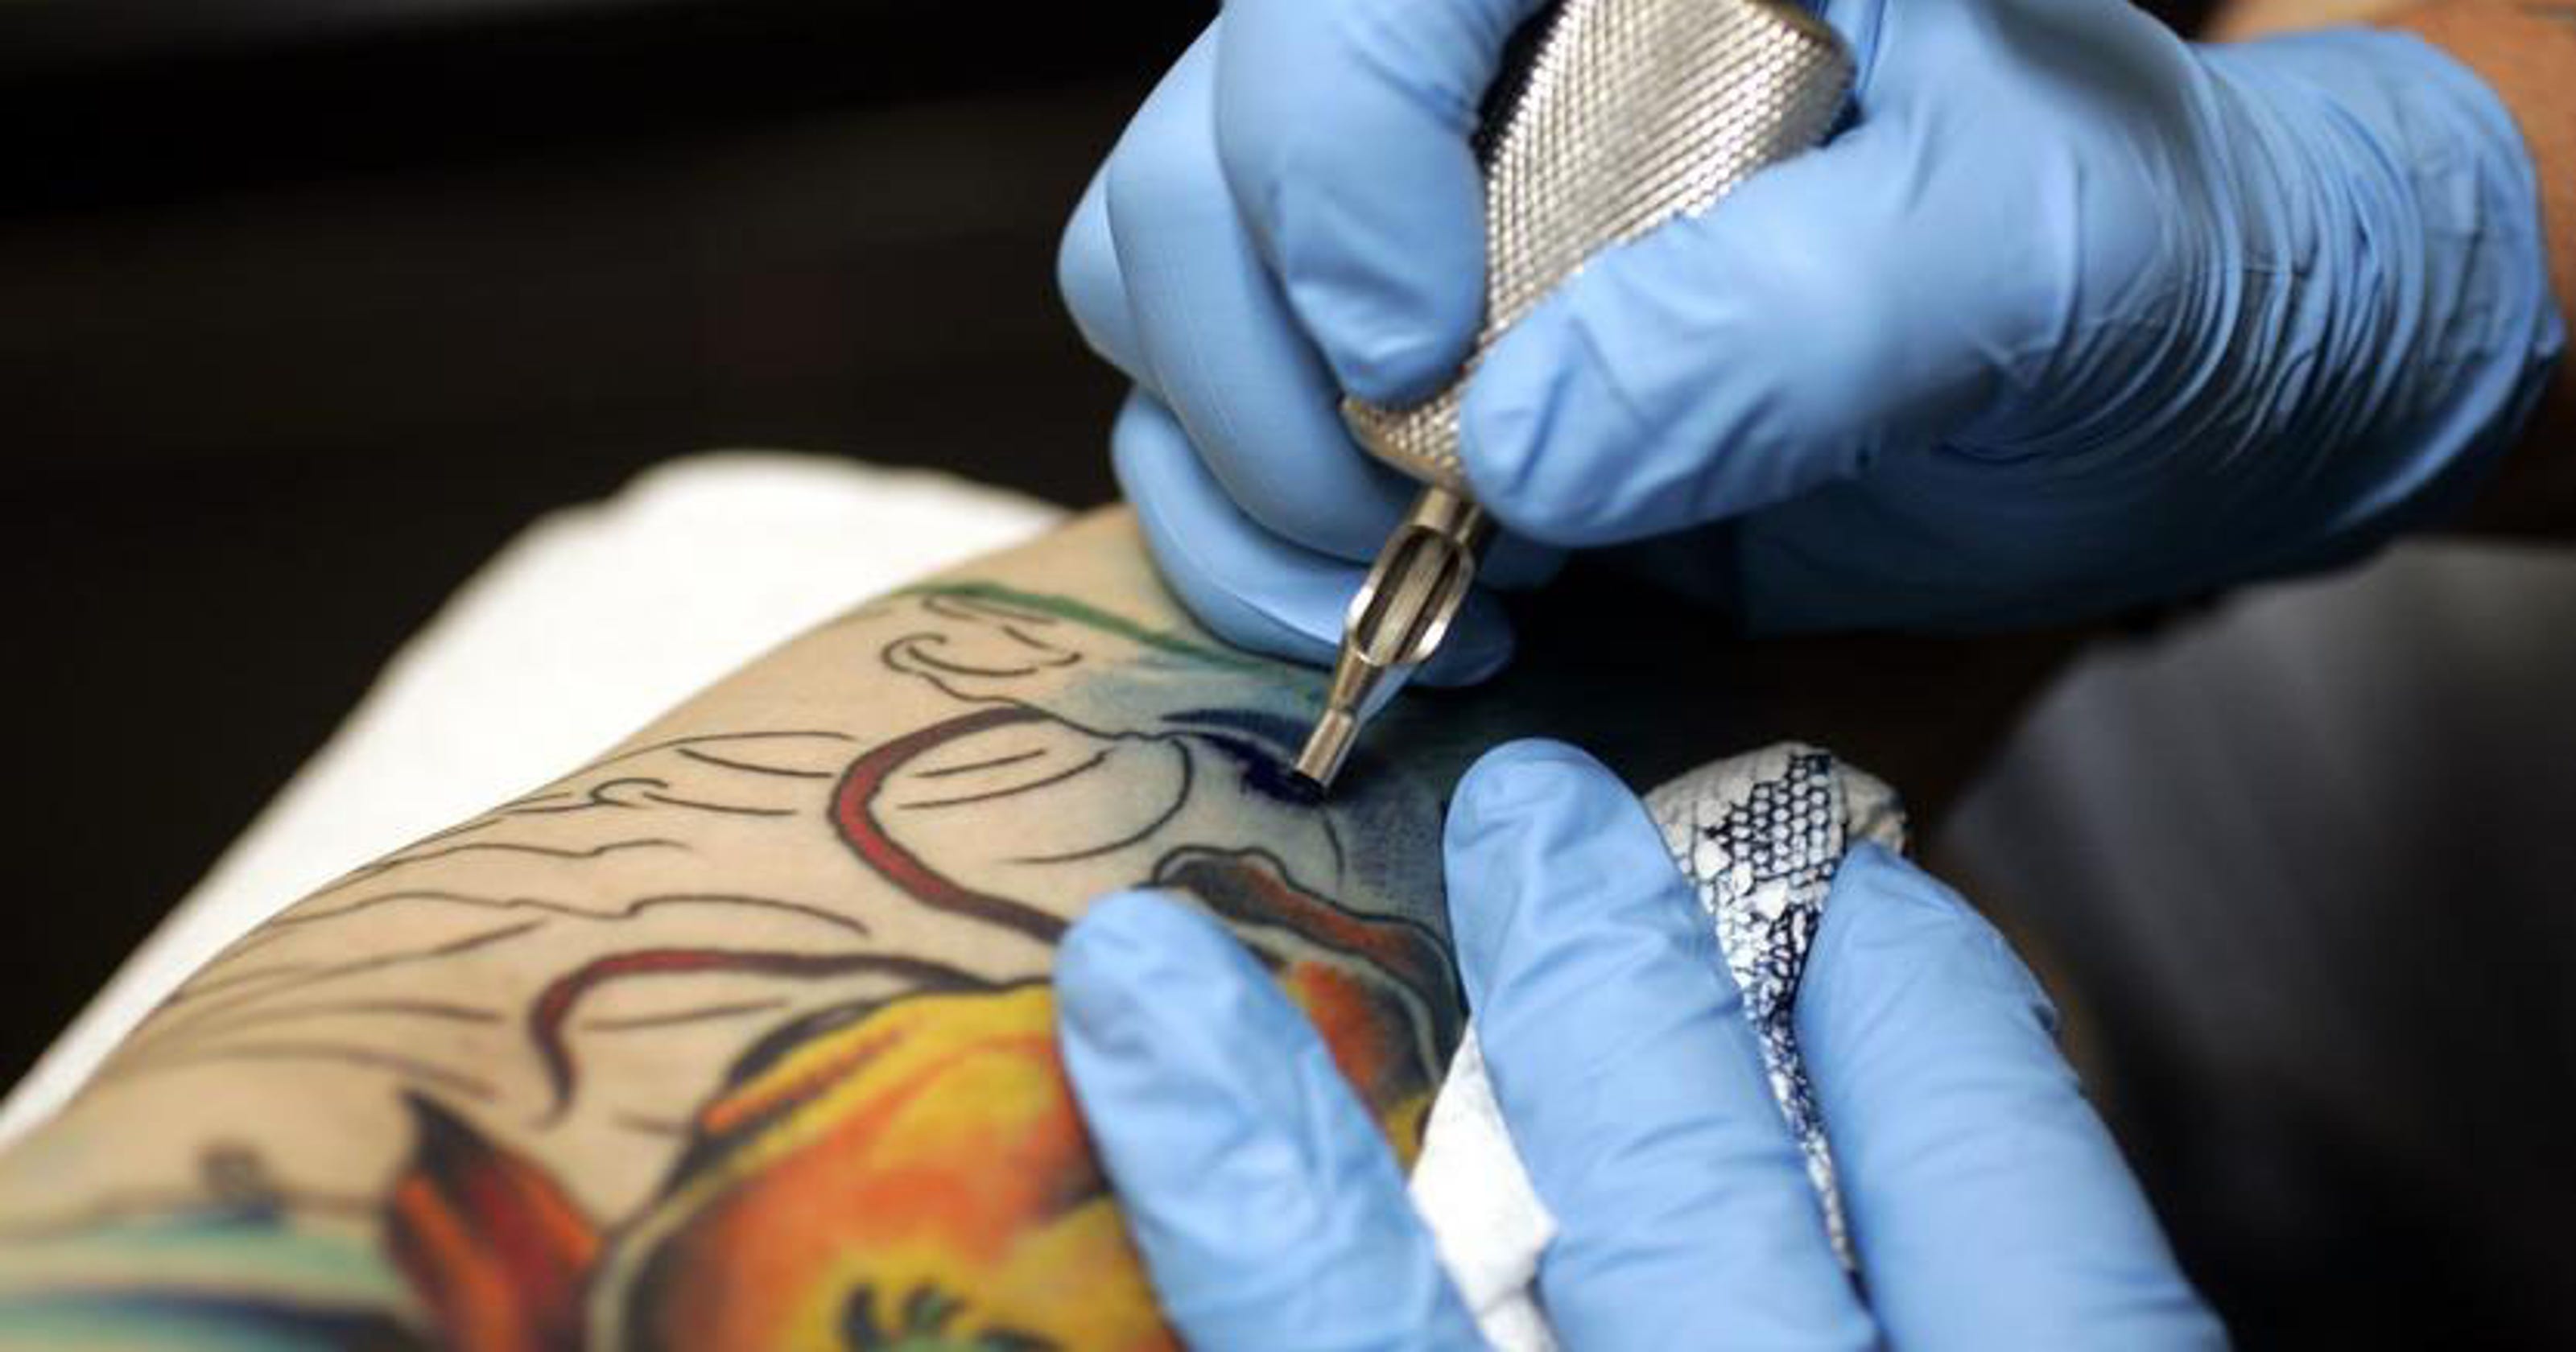 Report: More young people have tattoos and piercings than ever before